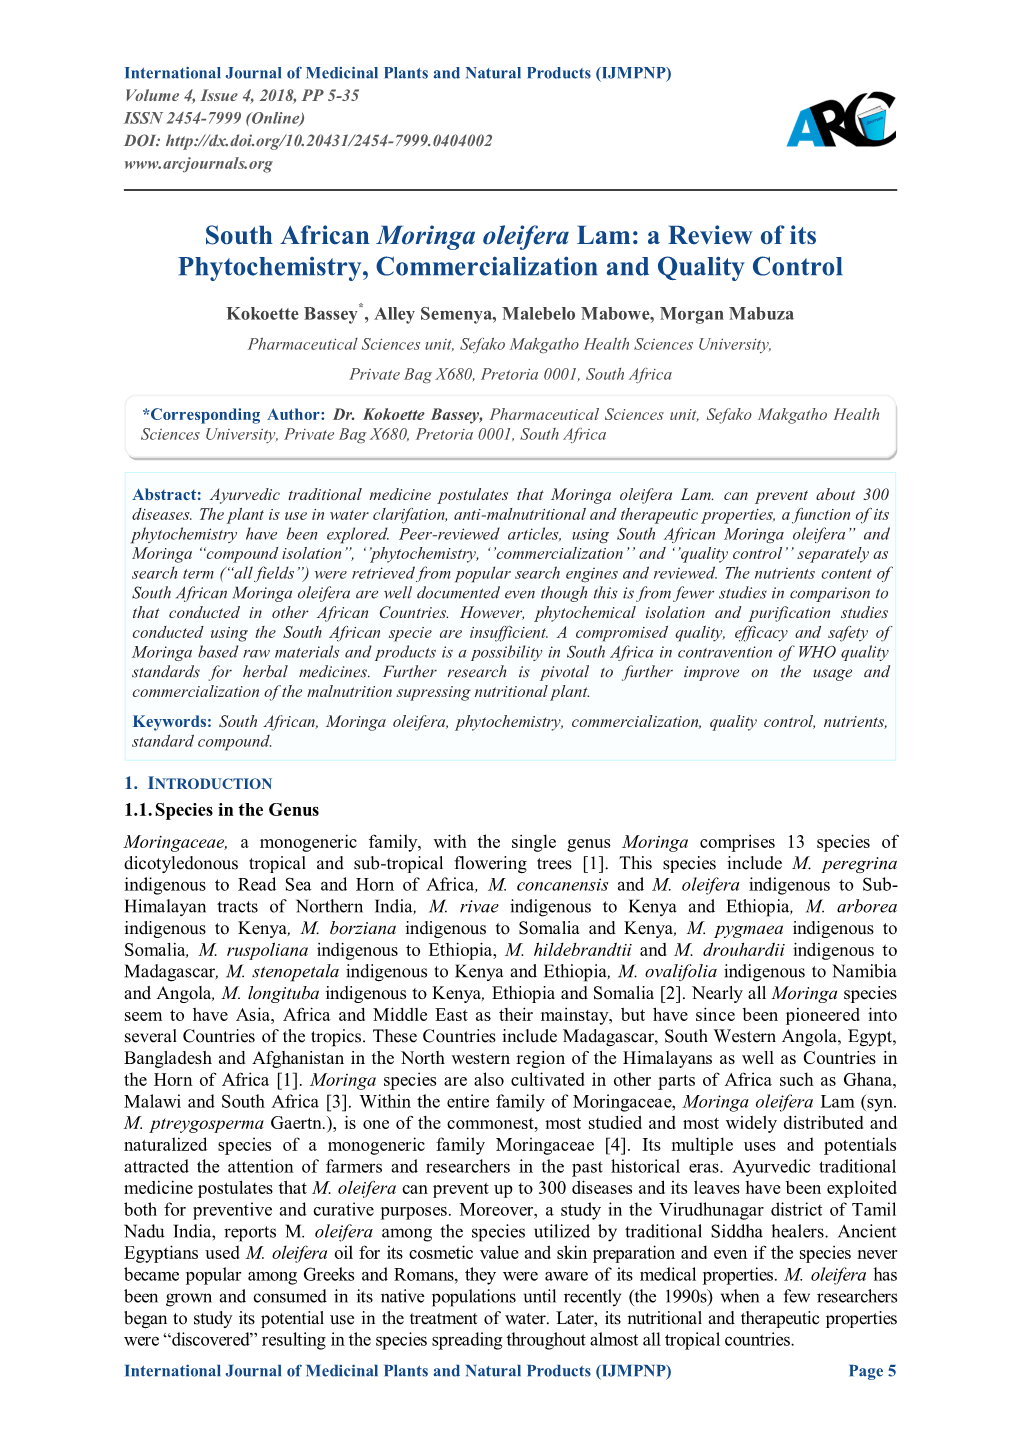 South African Moringa Oleifera Lam: a Review of Its Phytochemistry, Commercialization and Quality Control